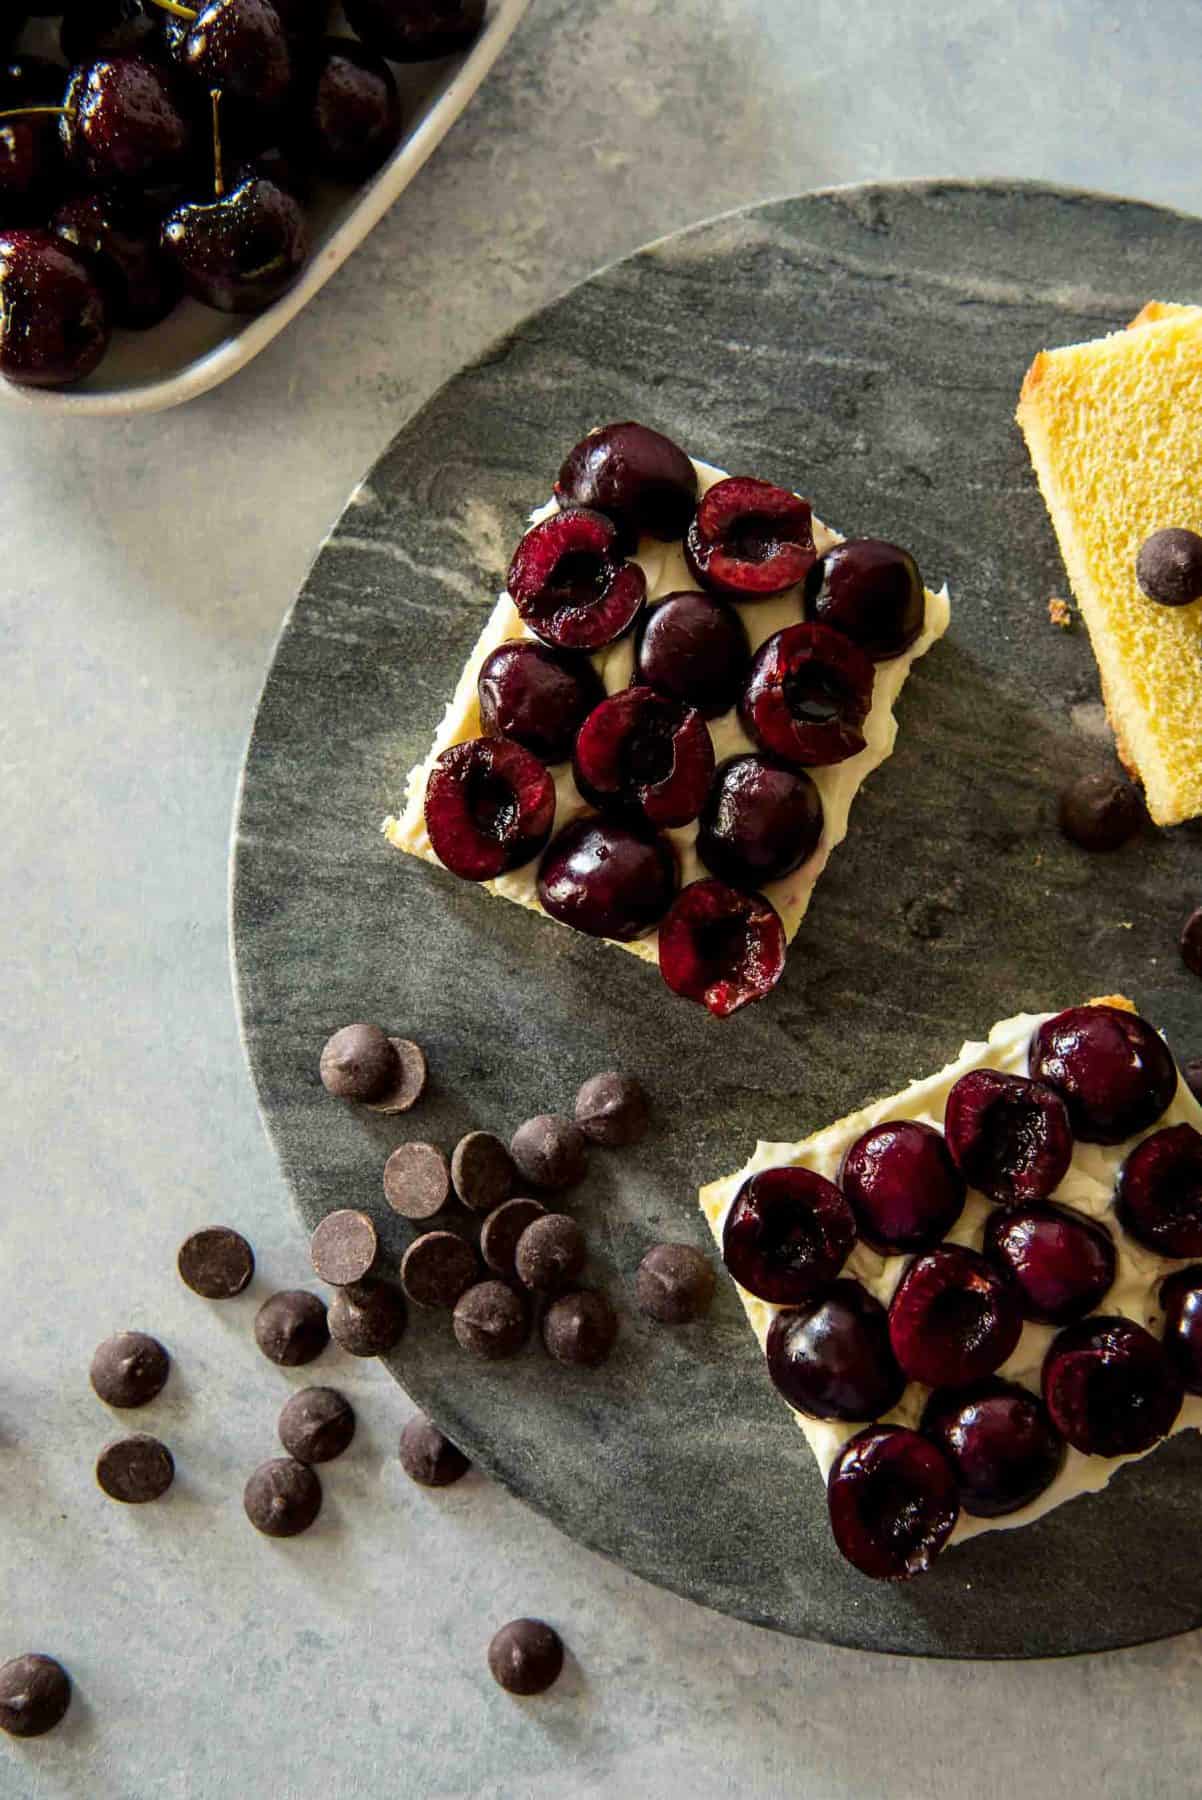 Prepare to appreciate sandwiches in a whole new way with this Dark Chocolate Cherry Dessert Grilled Cheese! Fresh bing cherries, sweetened Mascarpone, and luscious dark chocolate melted on brioche make this a sandwich destined for your dessert menu!